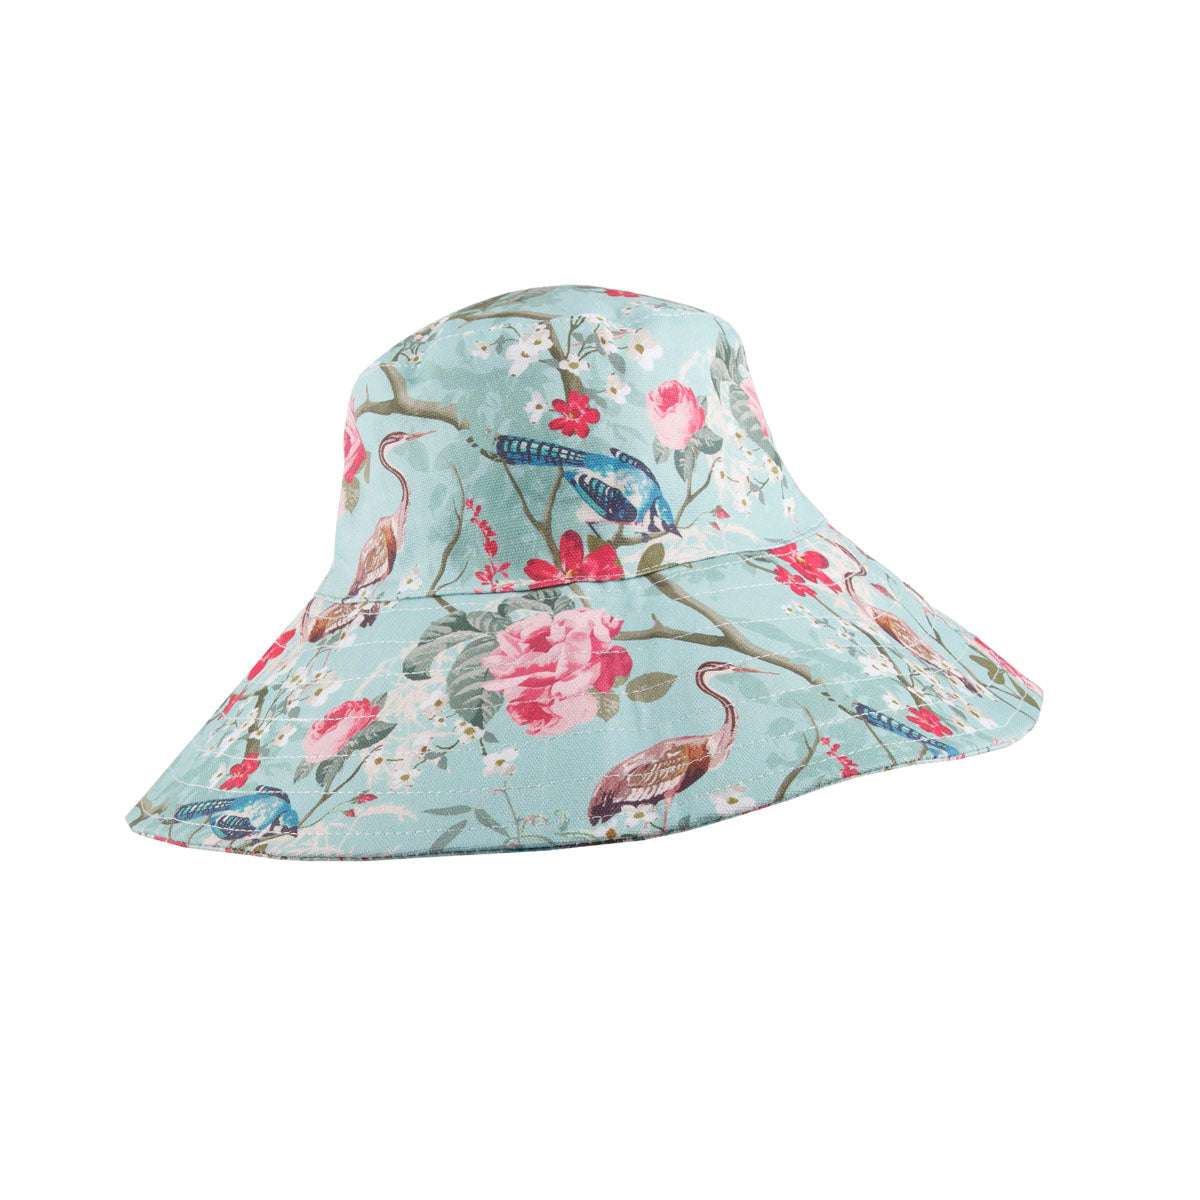 Native Youth bucket hat and swim shorts in blue swirl print - part of a set